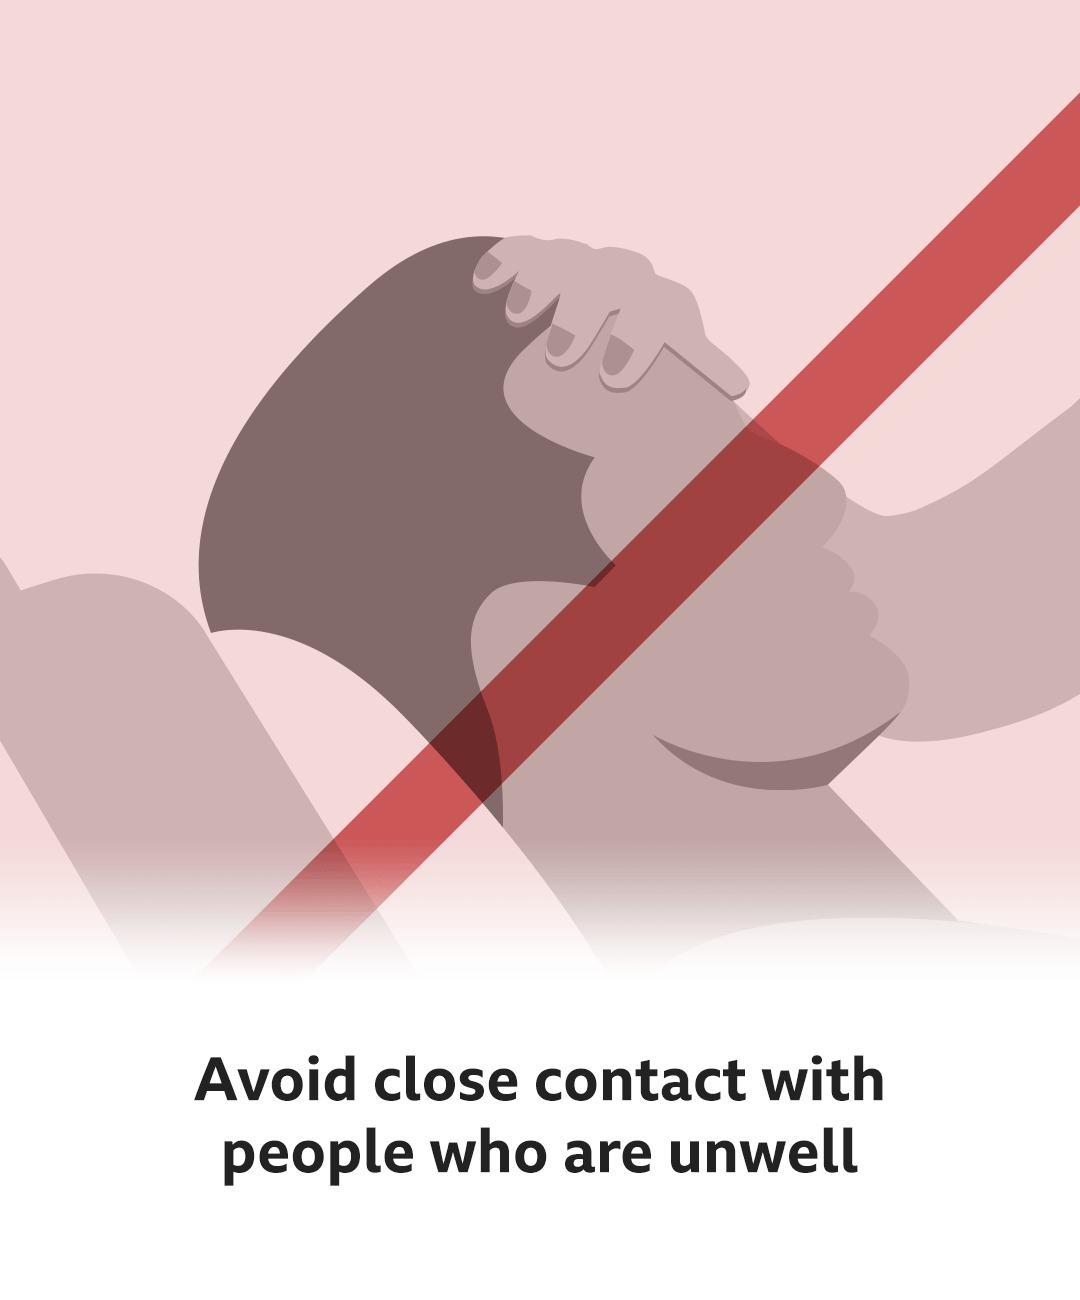 Avoid contact with people who are unwell